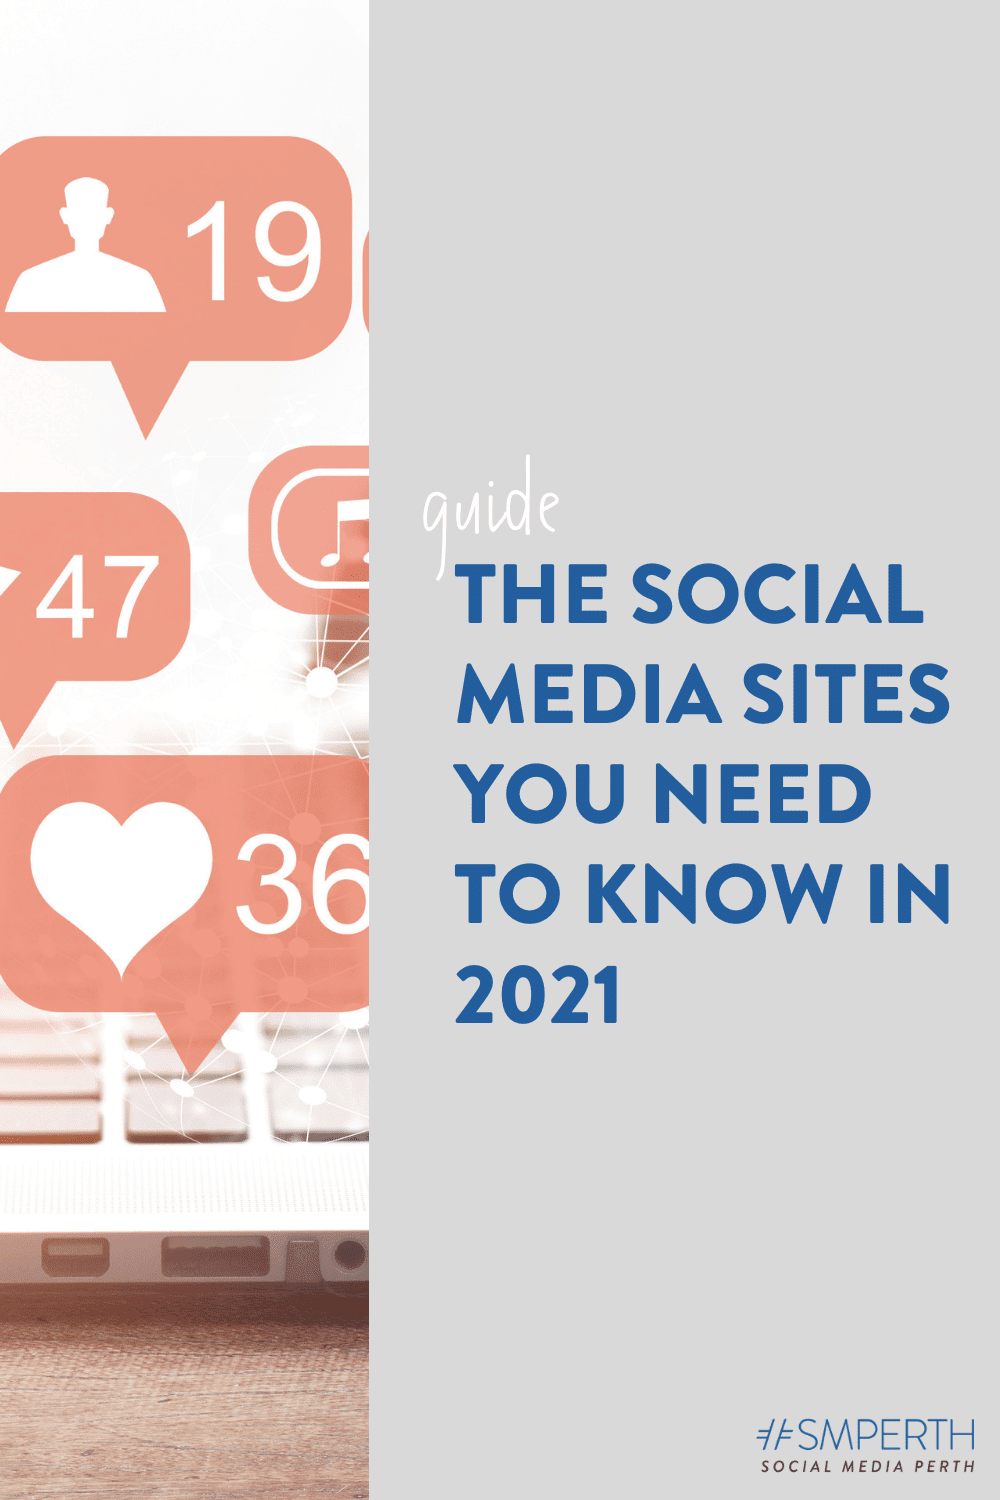 The social media sites you need to know in 2021